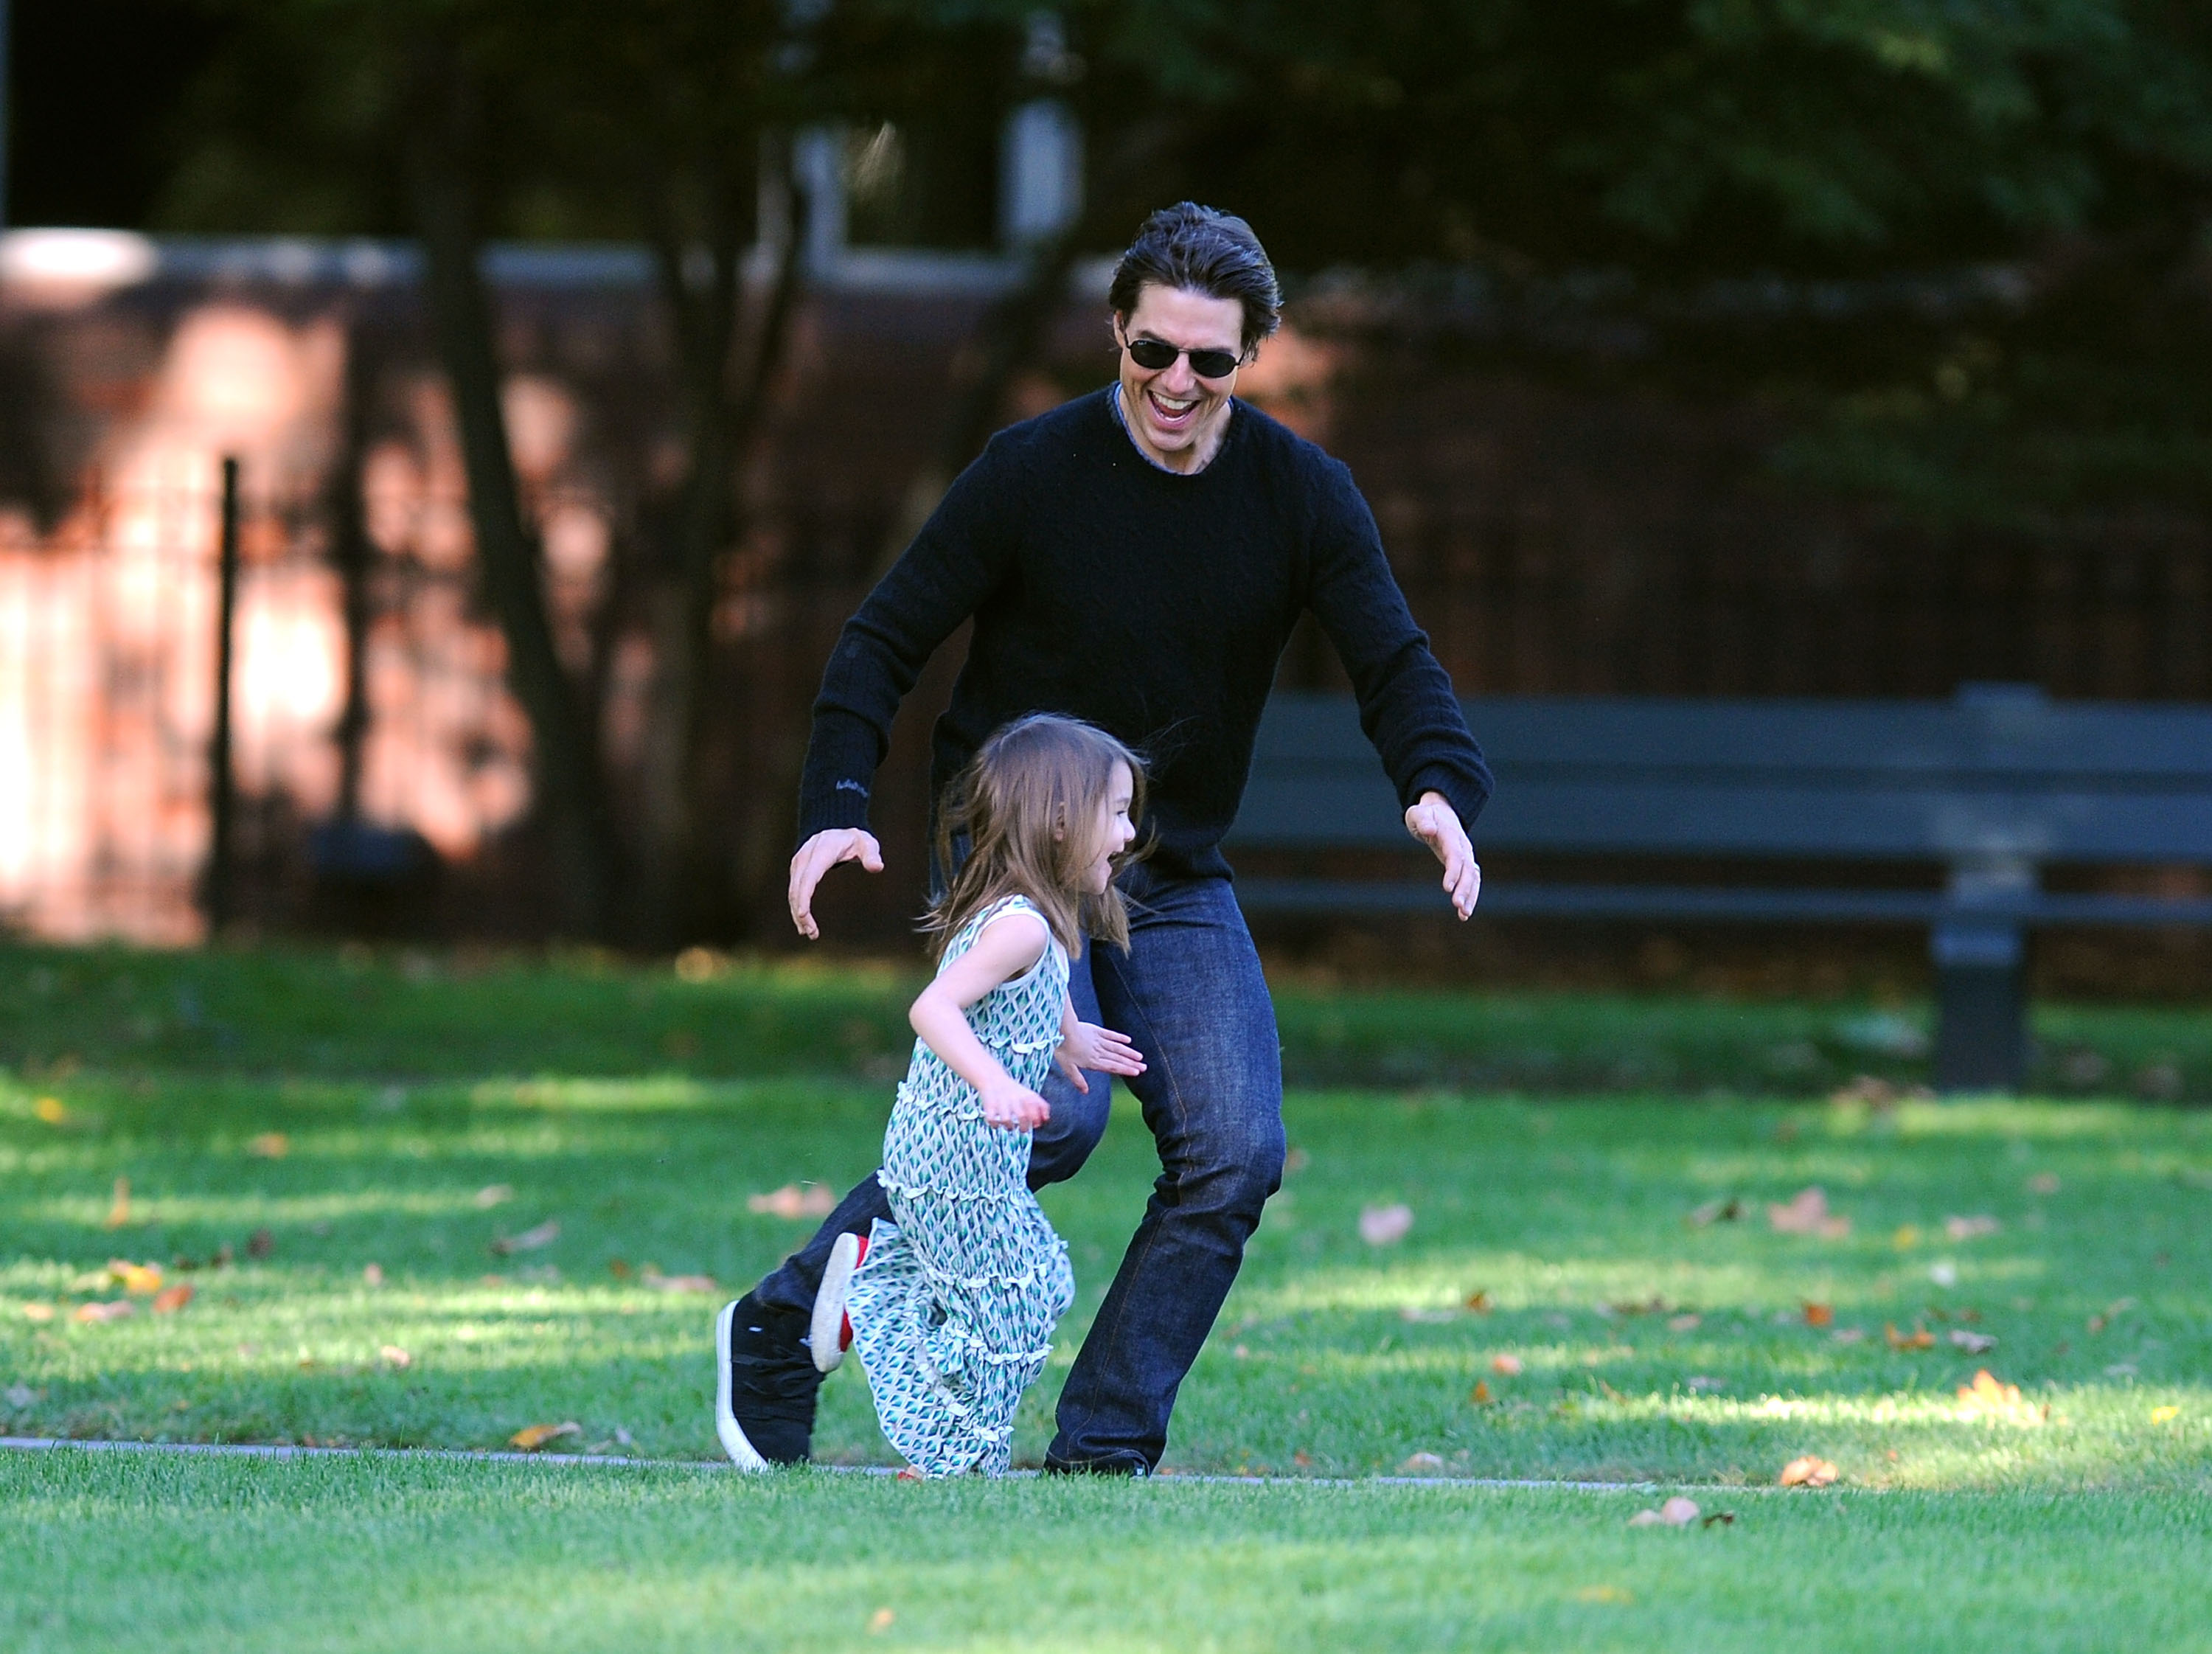 Tom Cruise and Suri Cruise in Cambridge, Massachusetts on October 10, 2009. | Source: Getty Images